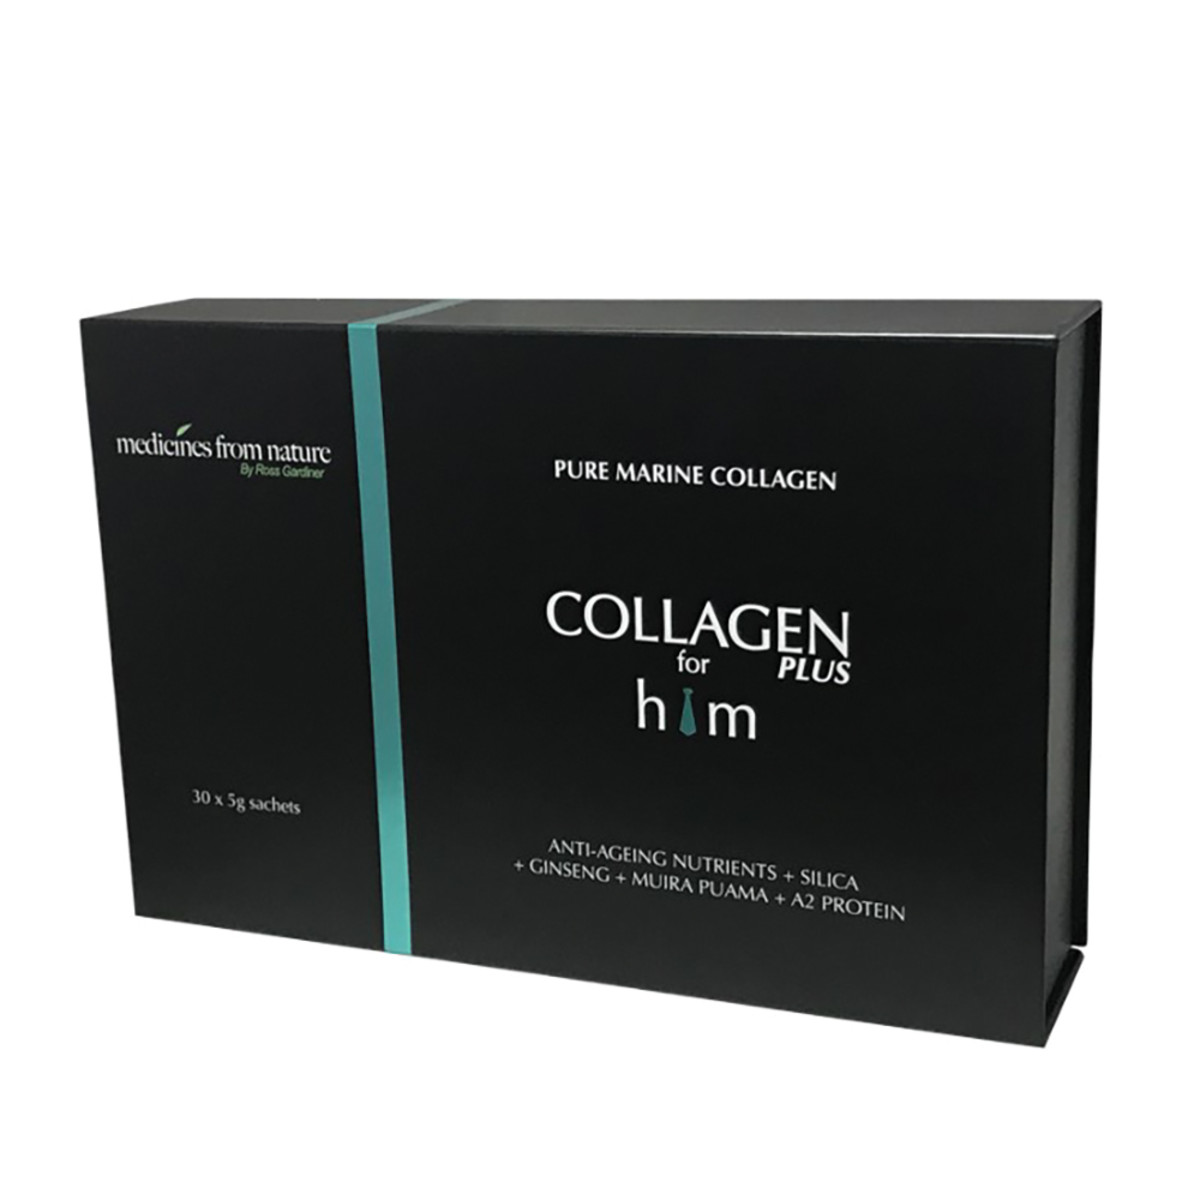 Medicines From Nature Collagen Plus for Him 5g x 30 Sachets_media-01